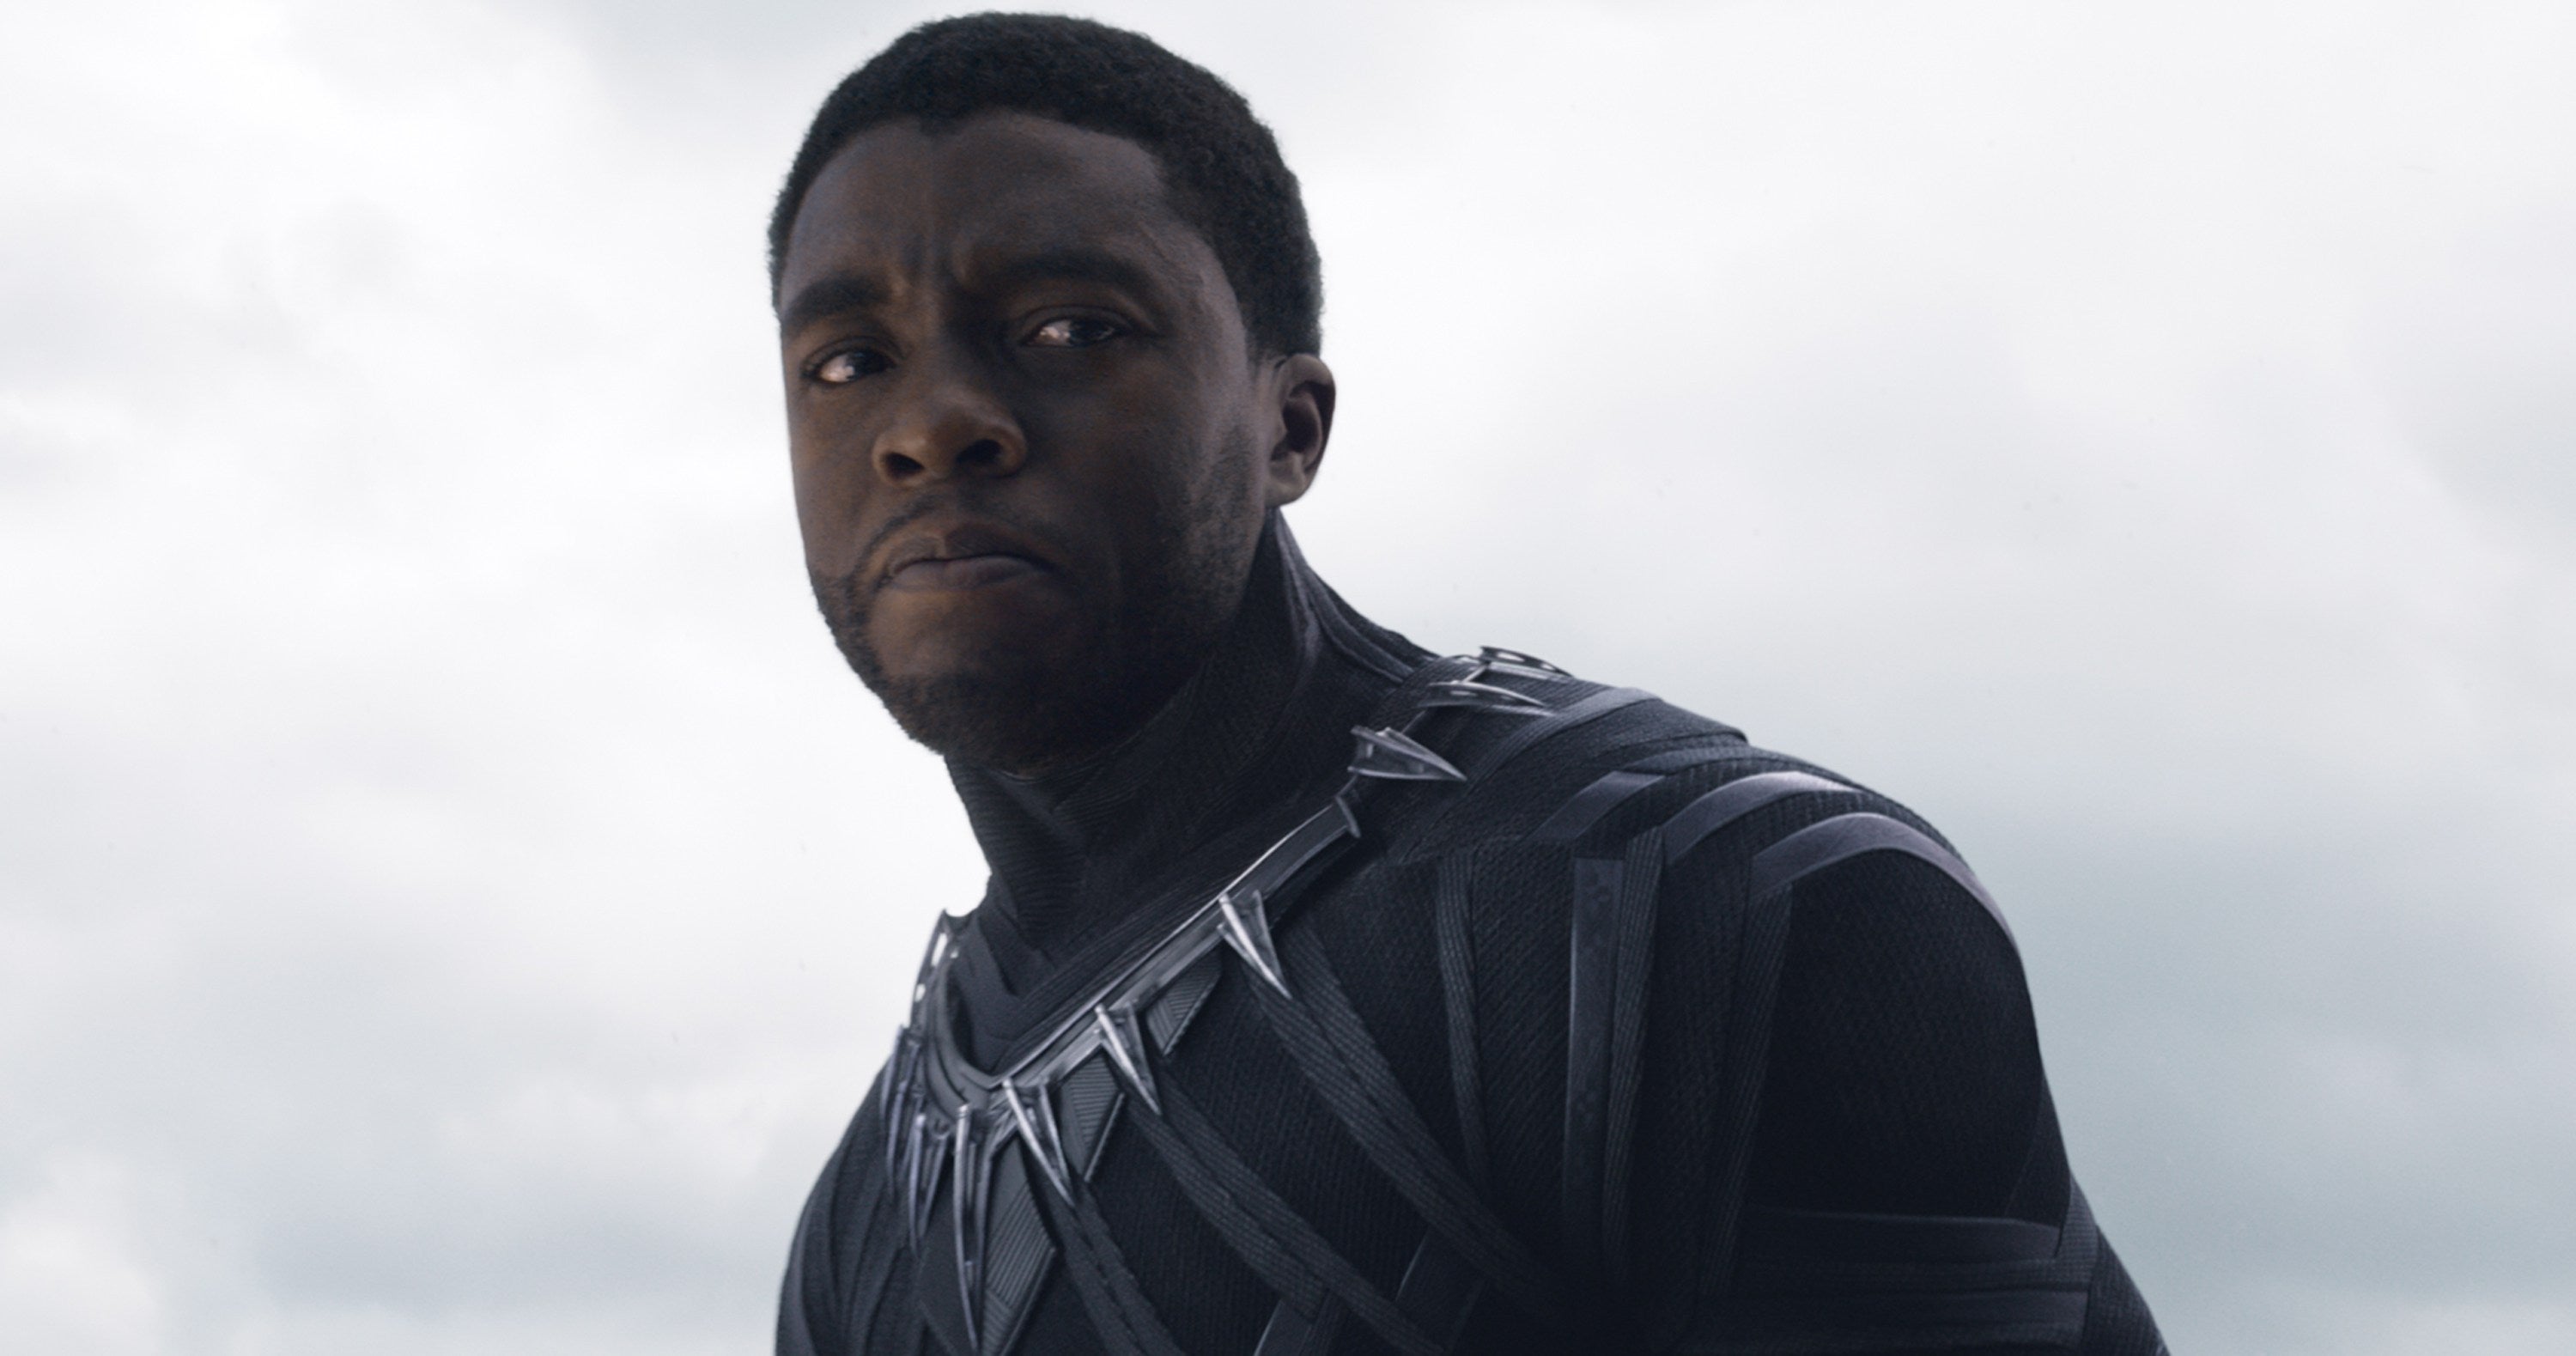 The 'Black Panther' Sneak Peek Gets Standing Ovation At Comic Con
